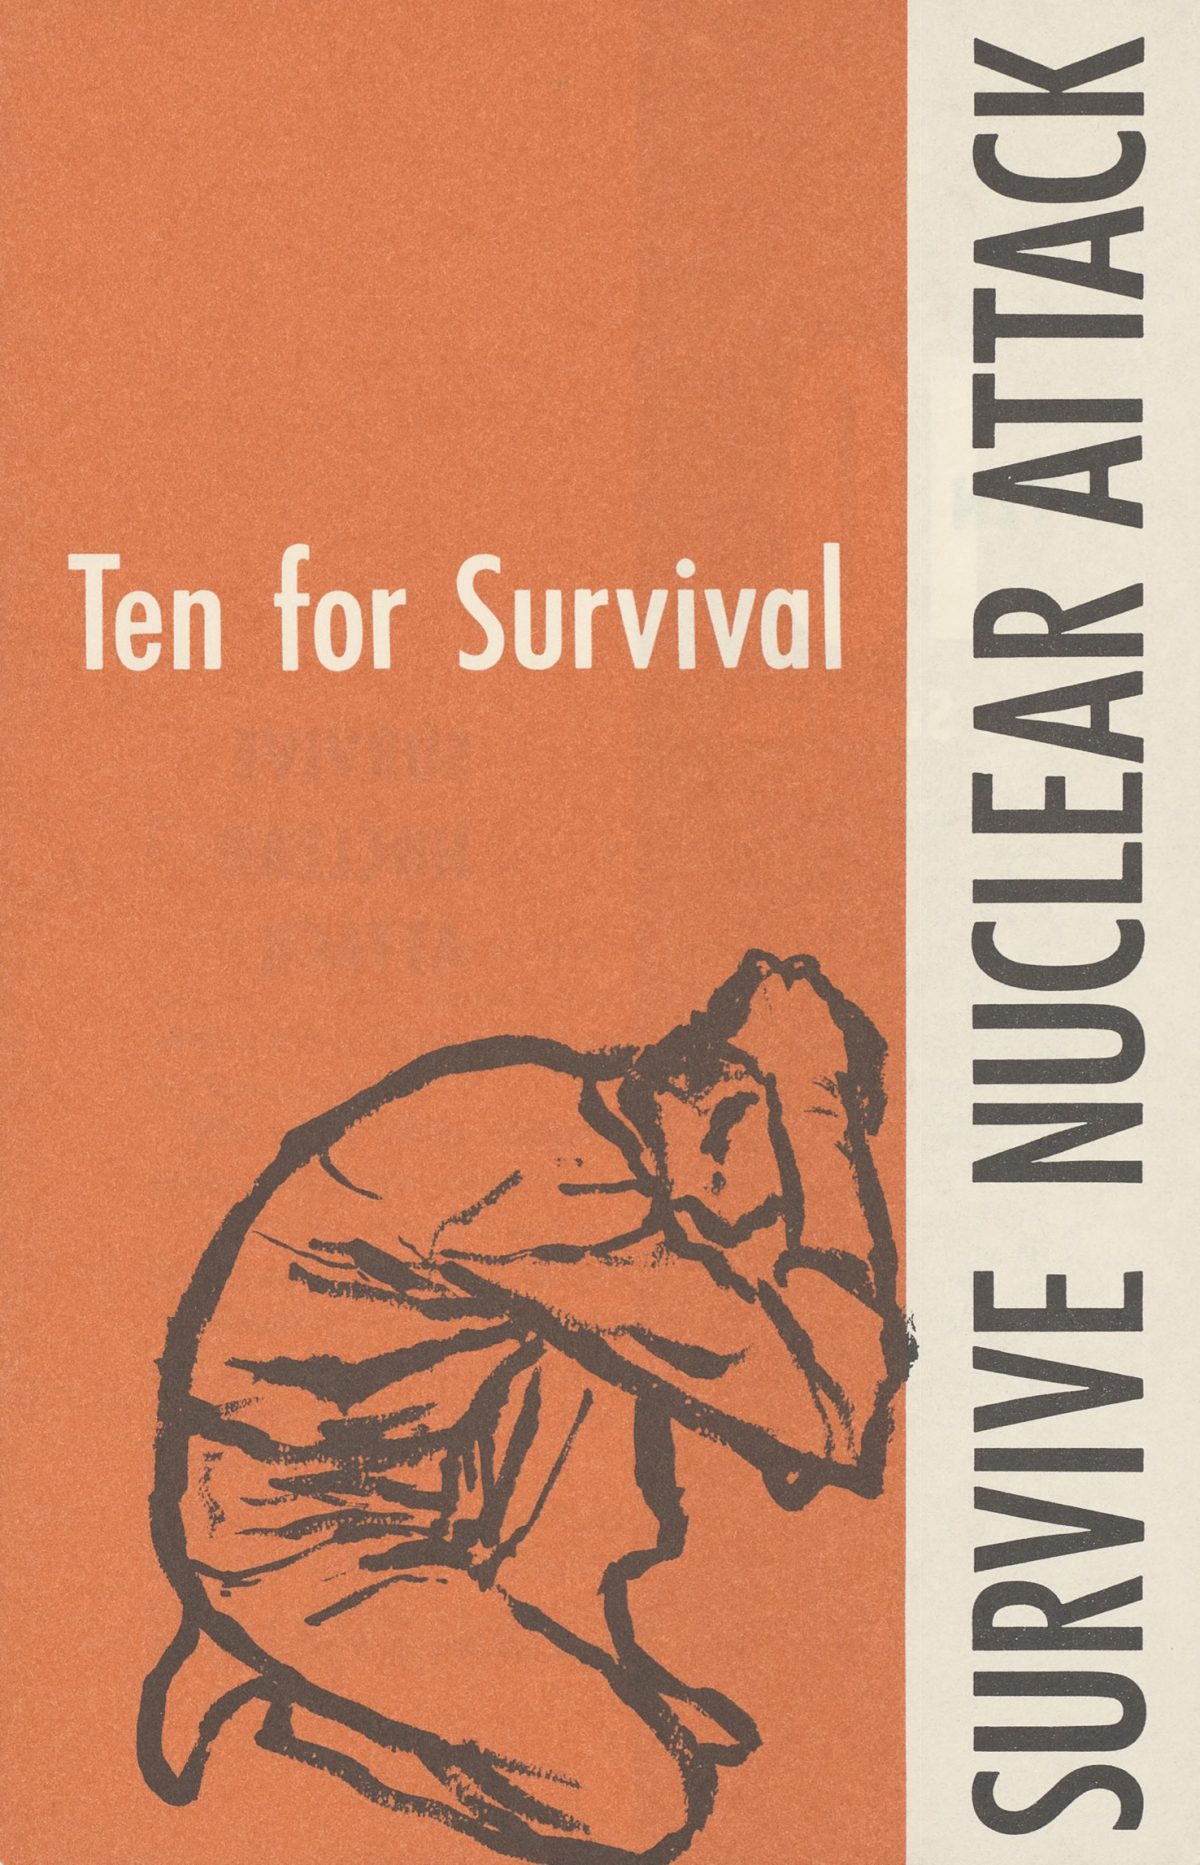 Ten for Survival: Survive Nuclear Attack ca. 1960